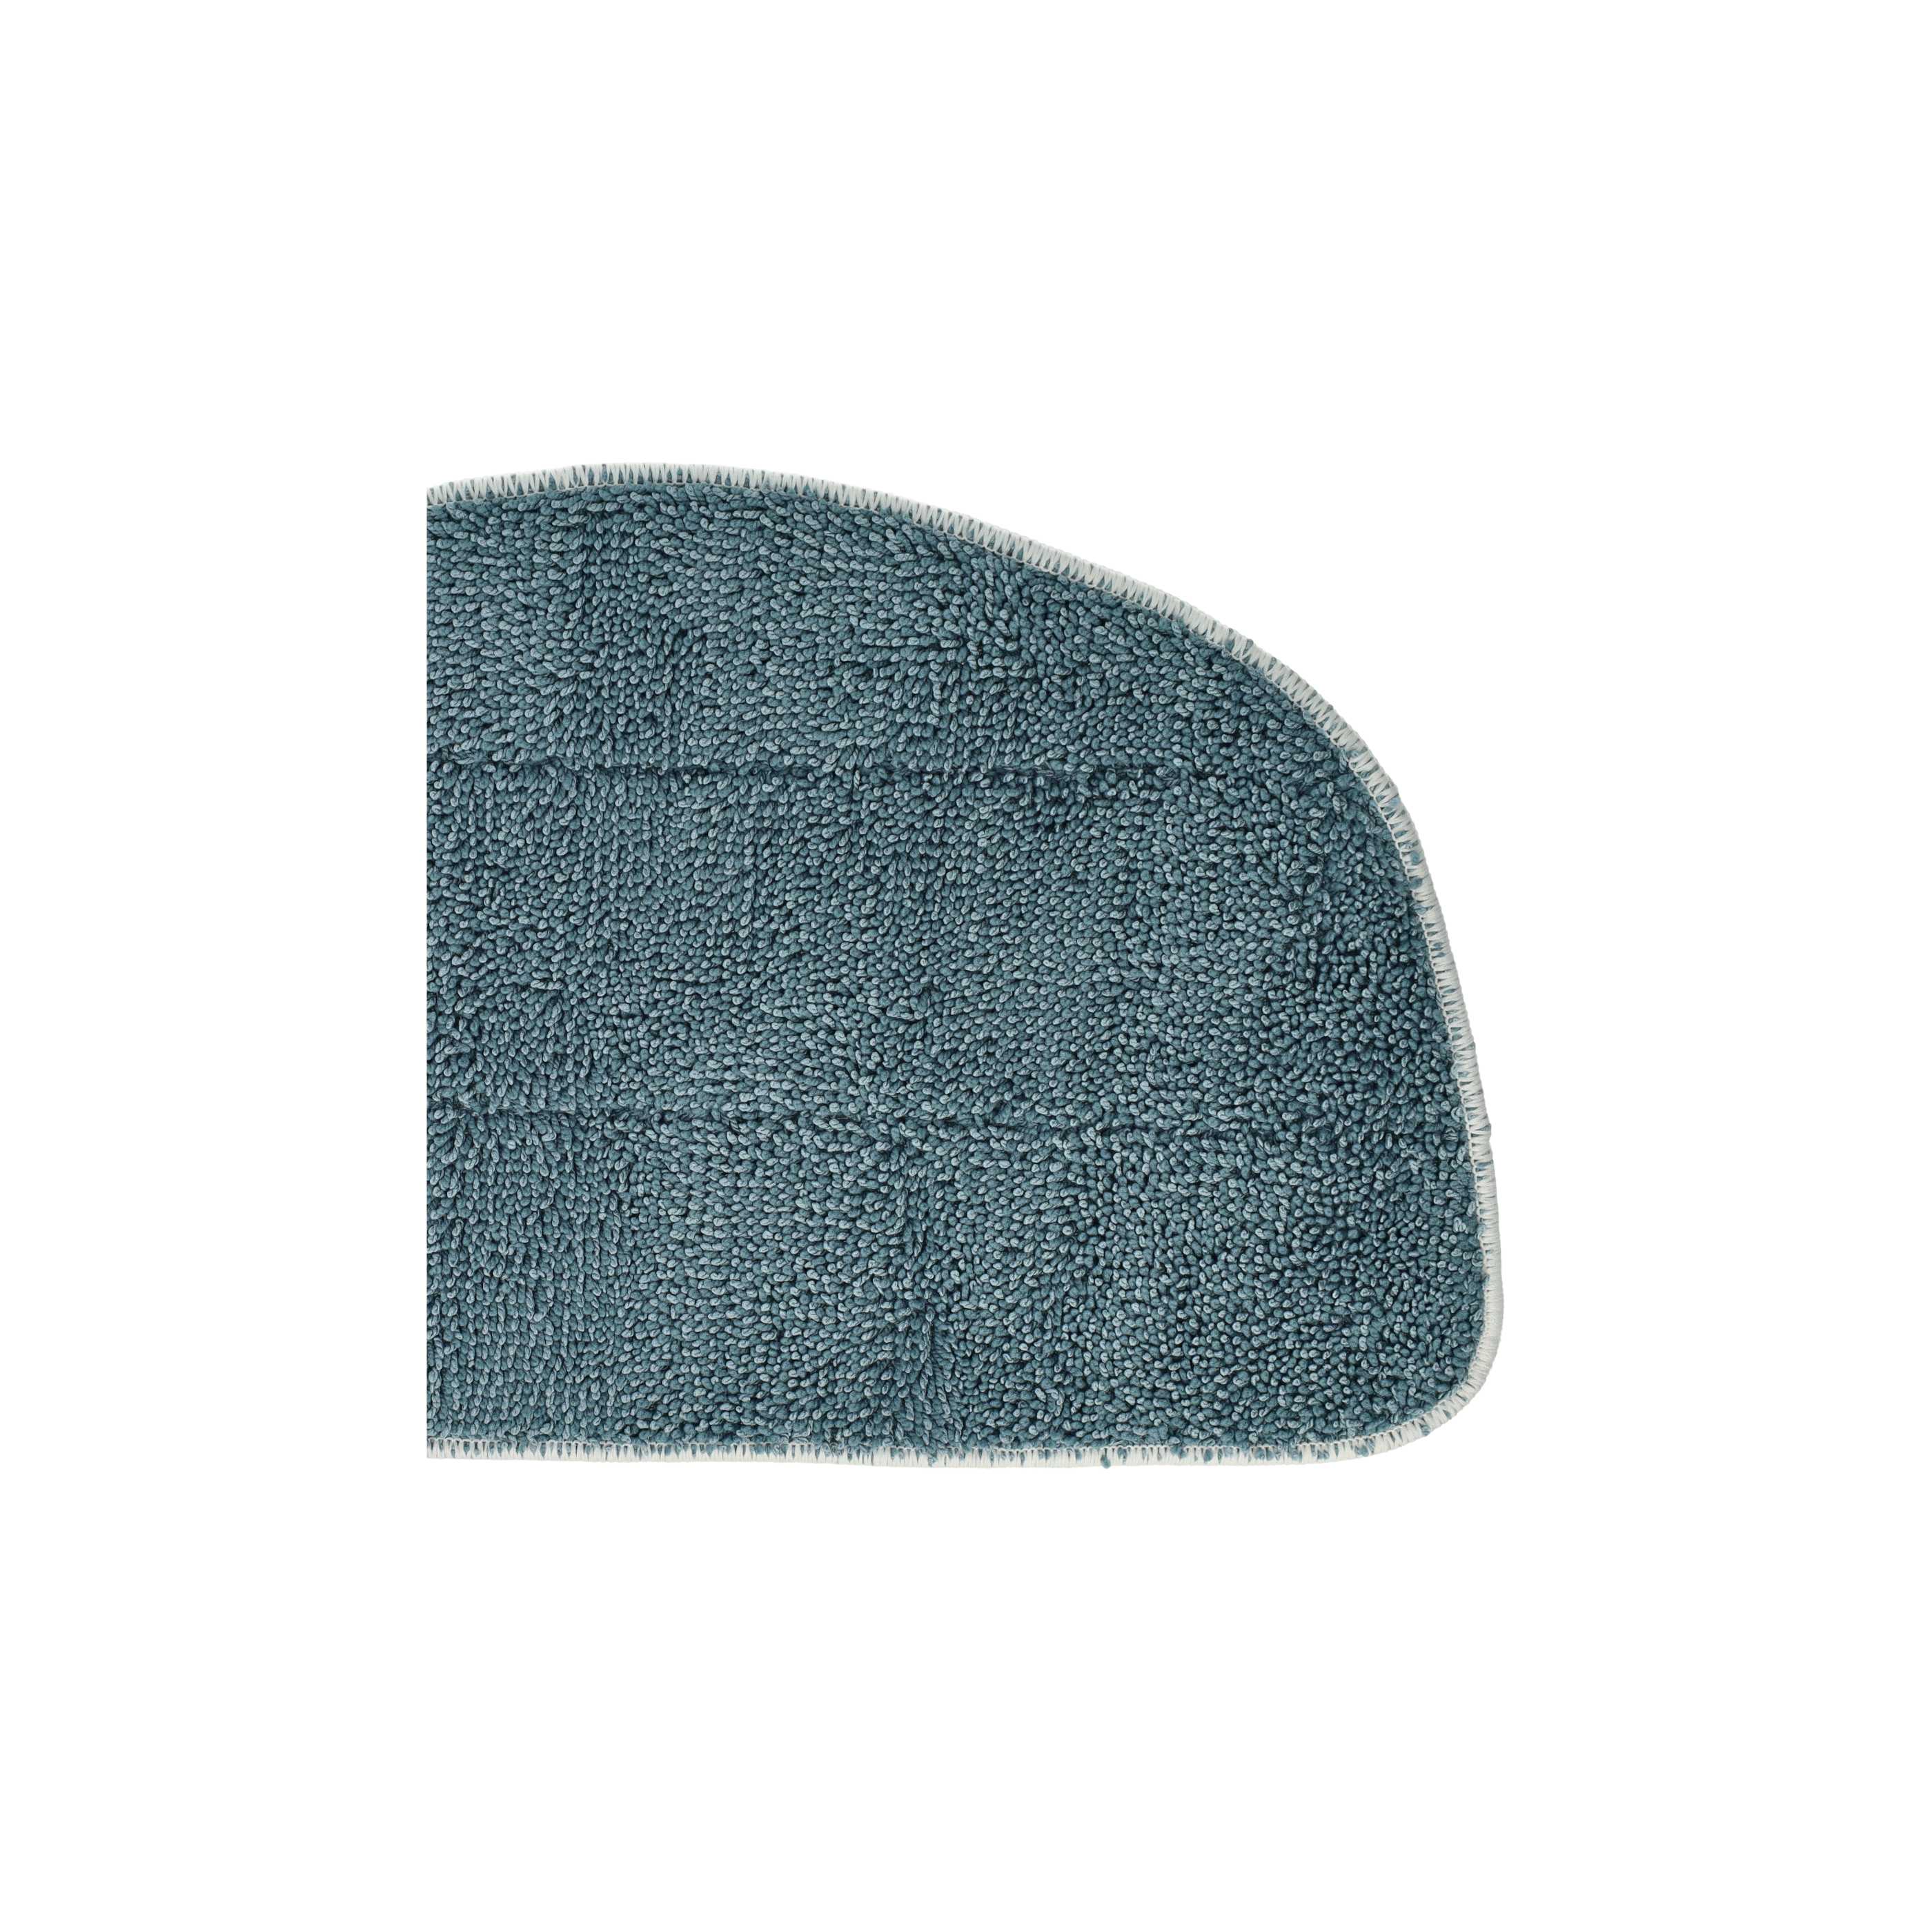 4x Cleaning Pad replaces Leifheit 11941 for LeifheitHot Spray Steamer, Steam Mop - Microfibre grey-blue